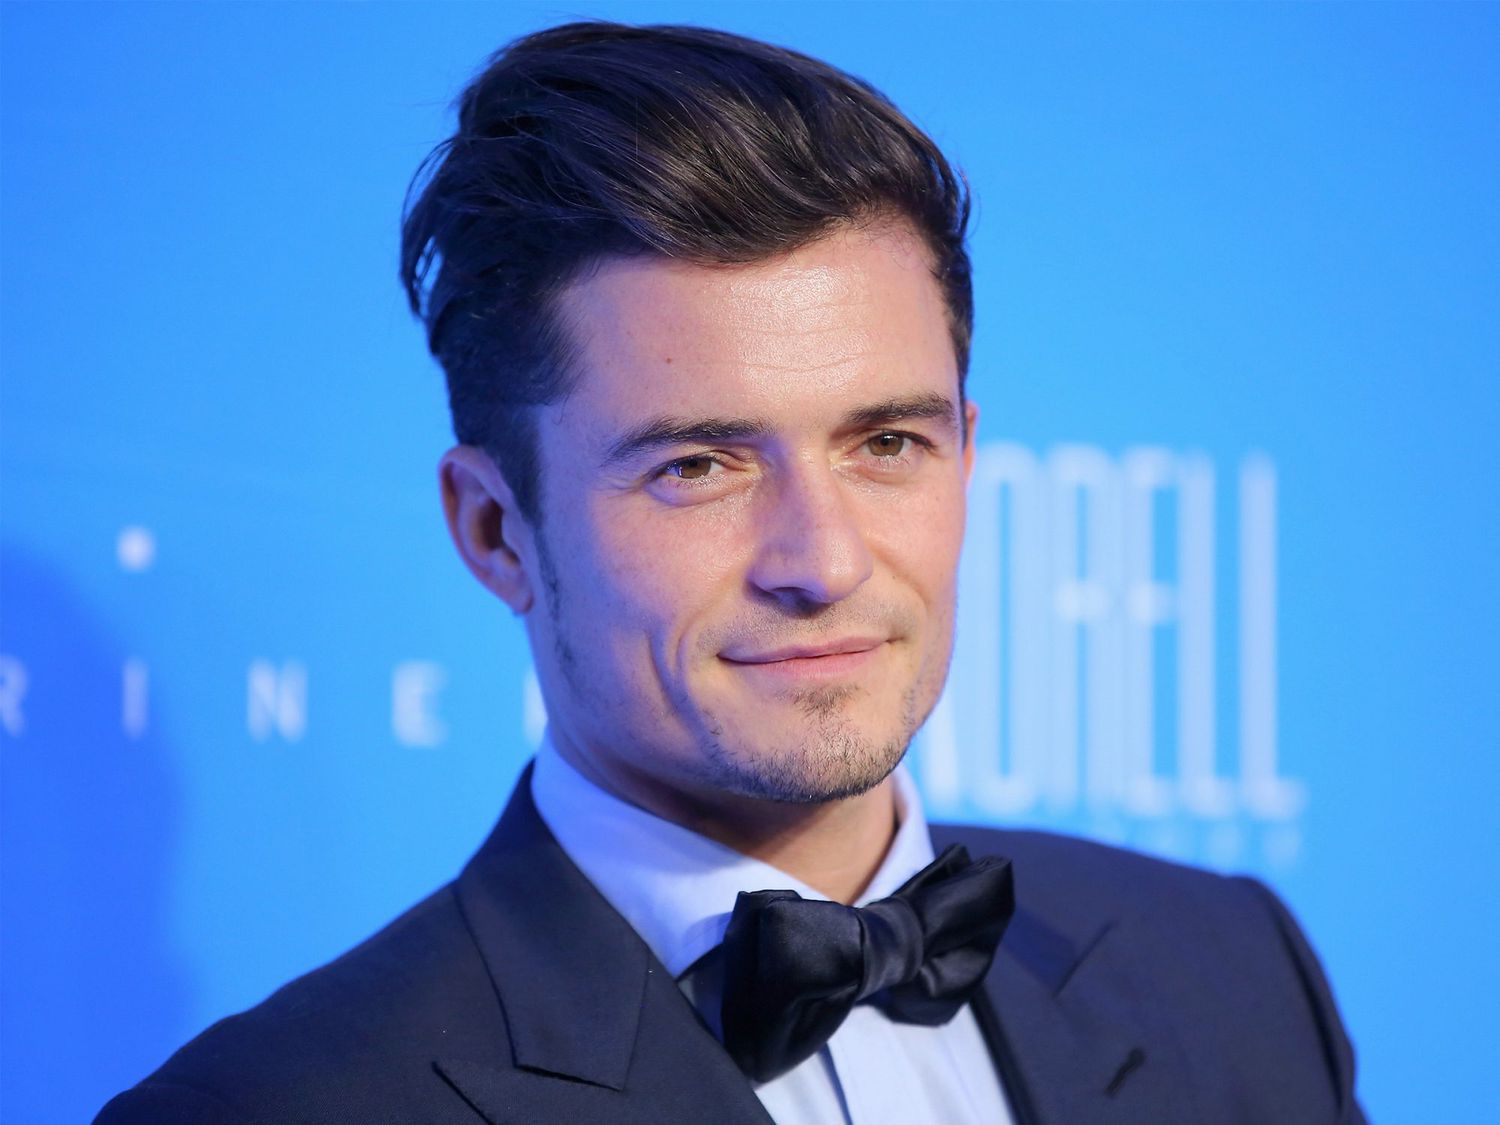 Orlando Bloom at the 11th Annual UNICEF Snowflake Ball in New York City on December 1, 2015&nbsp;